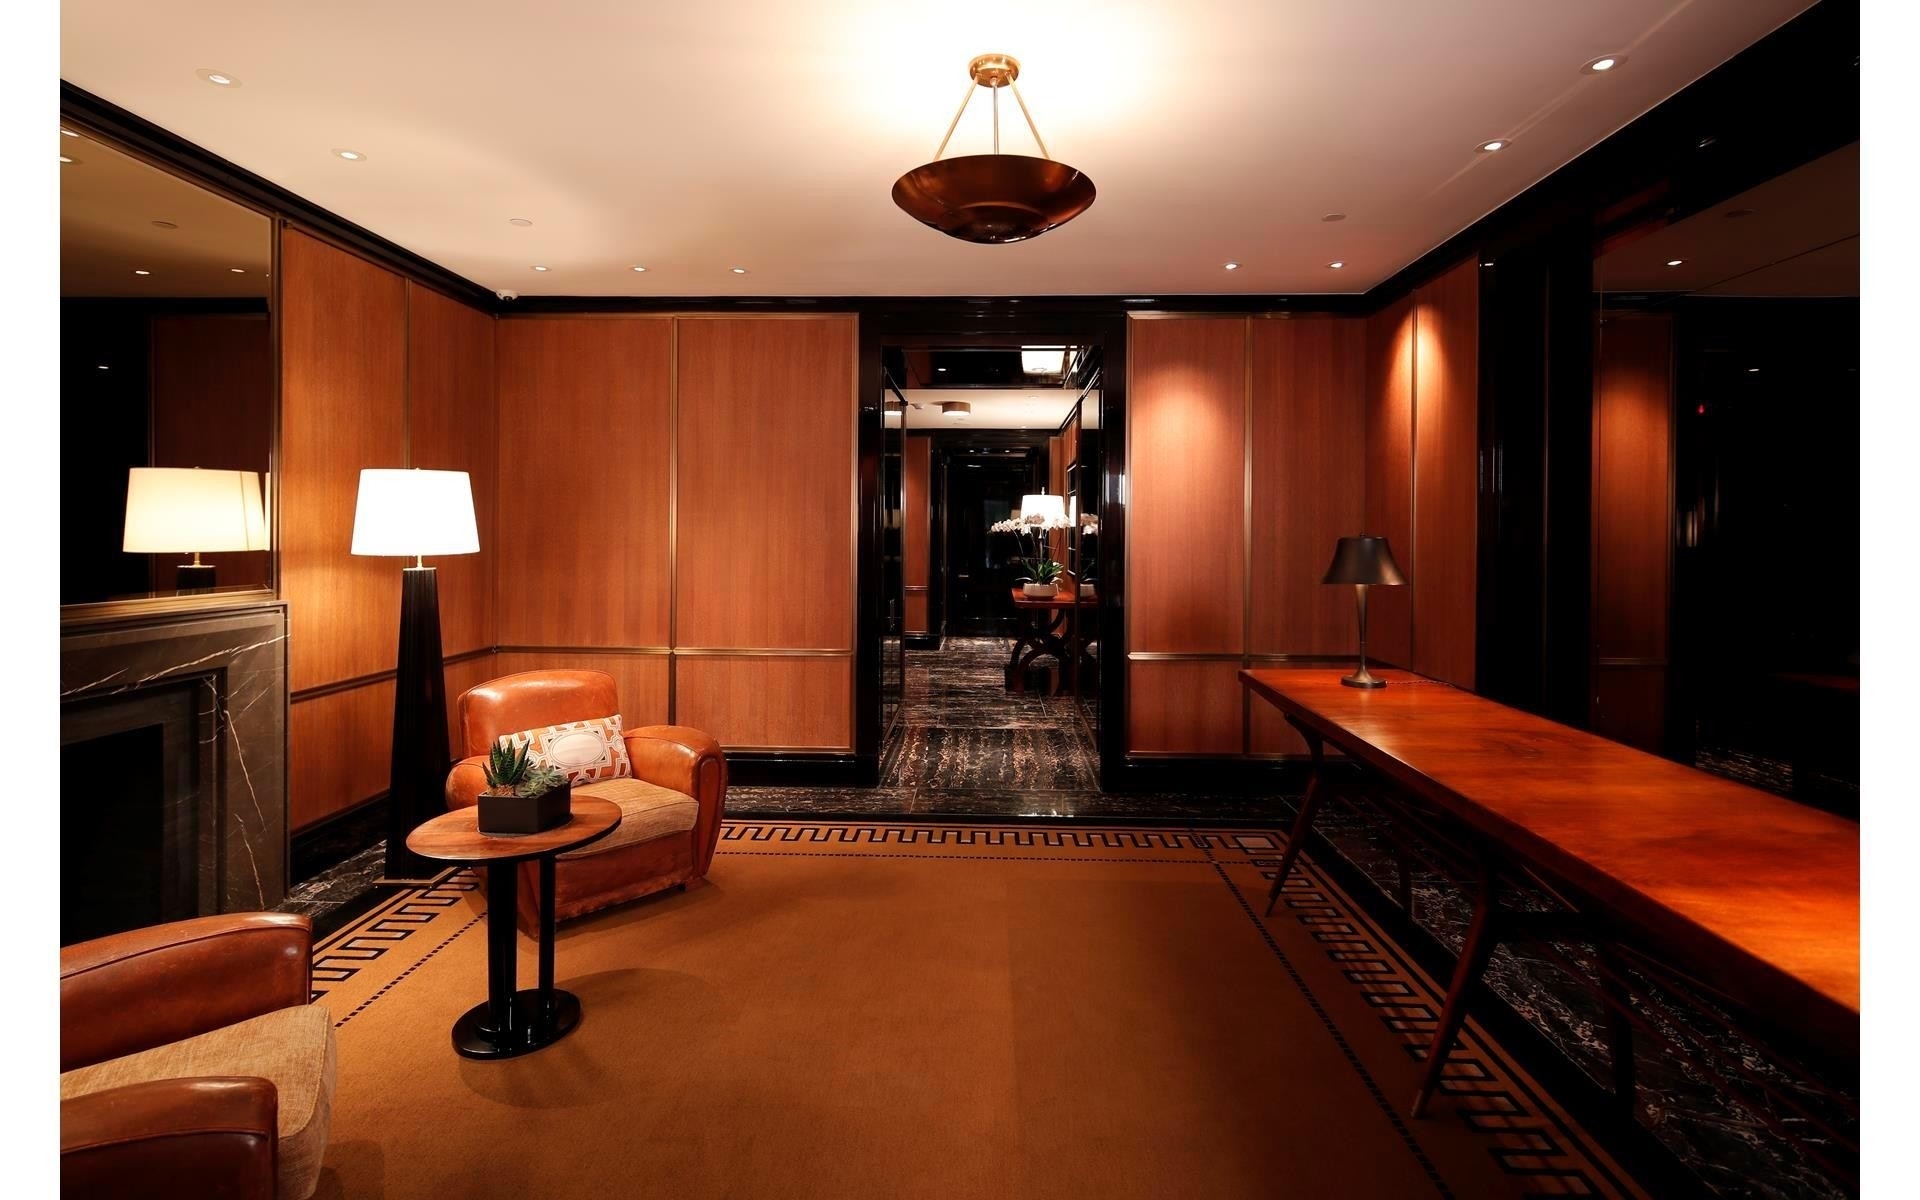 2. Rentals at Fasano Fifth Avenue, 815 FIFTH AVE, CLUBHOUSE Lenox Hill, New York, New York 10065